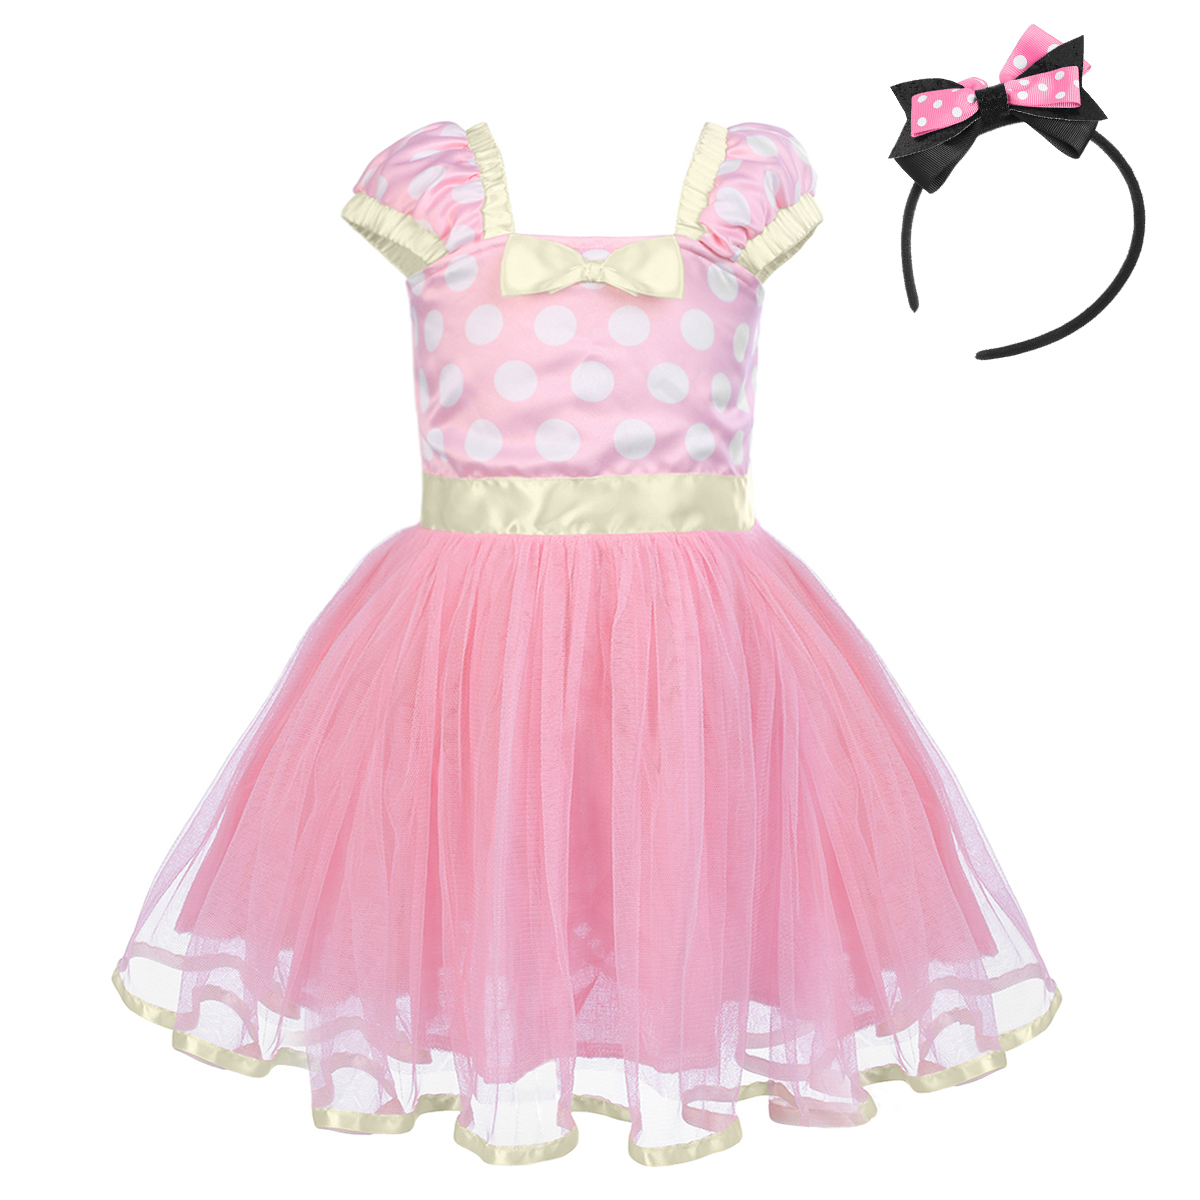 IBTOM CASTLE Toddler Girls Polka Dots Princess Party Cosplay Pageant Fancy Dress up Birthday Tutu Dress + Ears Headband Outfit Set 18-24 Months Pink - image 2 of 8